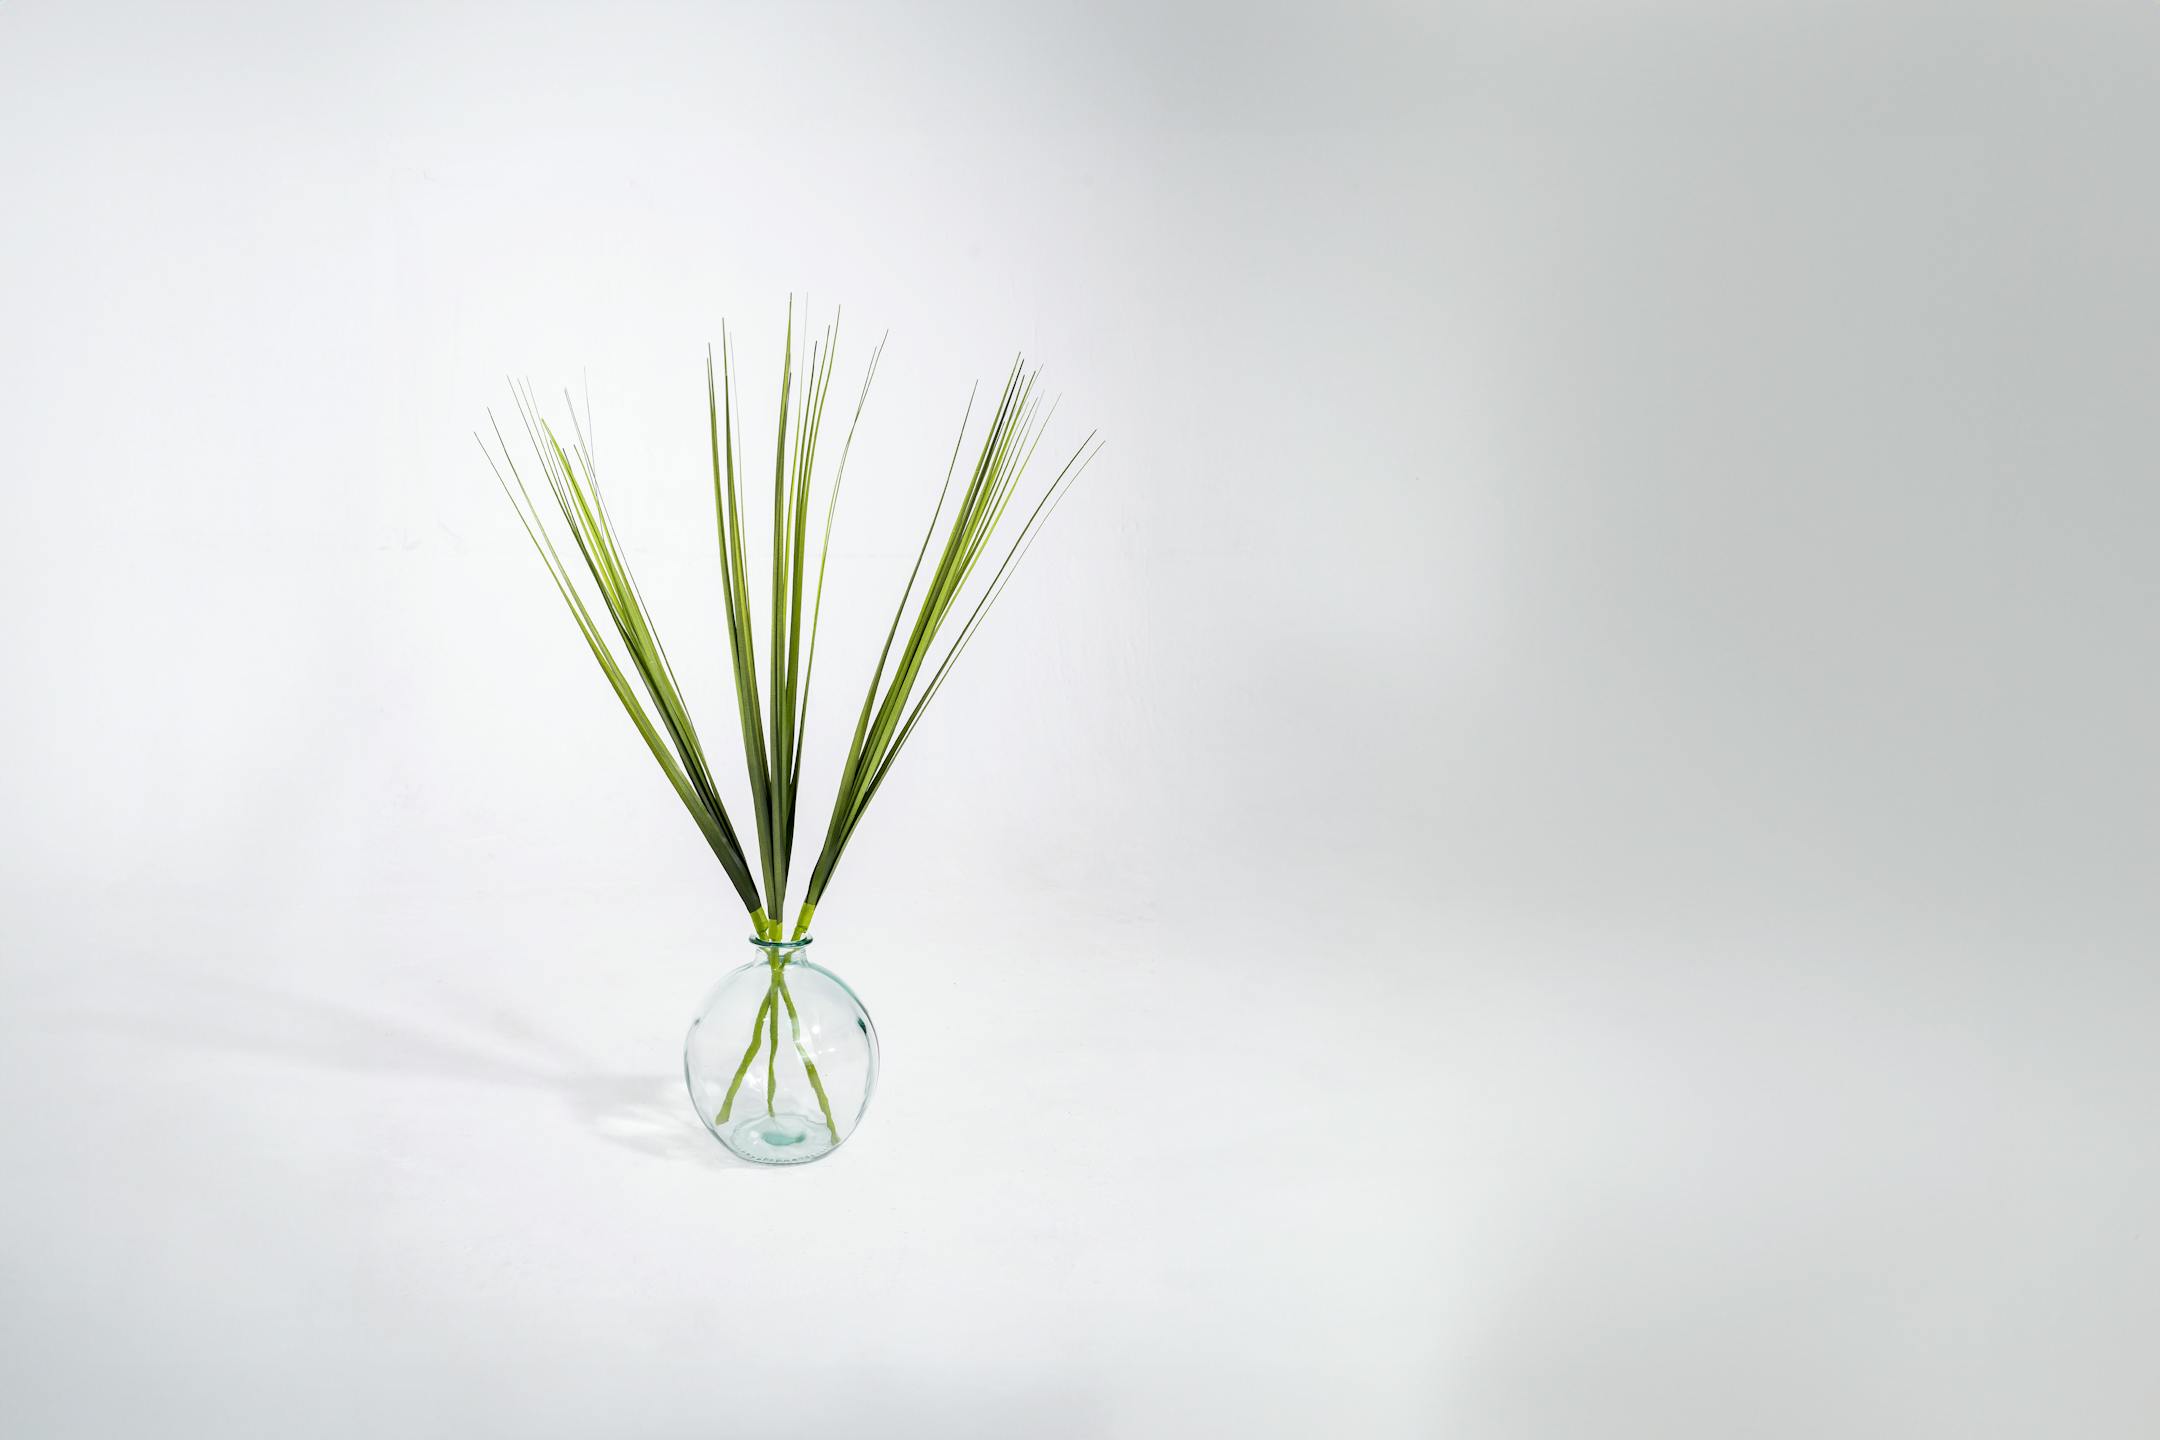 Three artificial China grass stems in glass vase